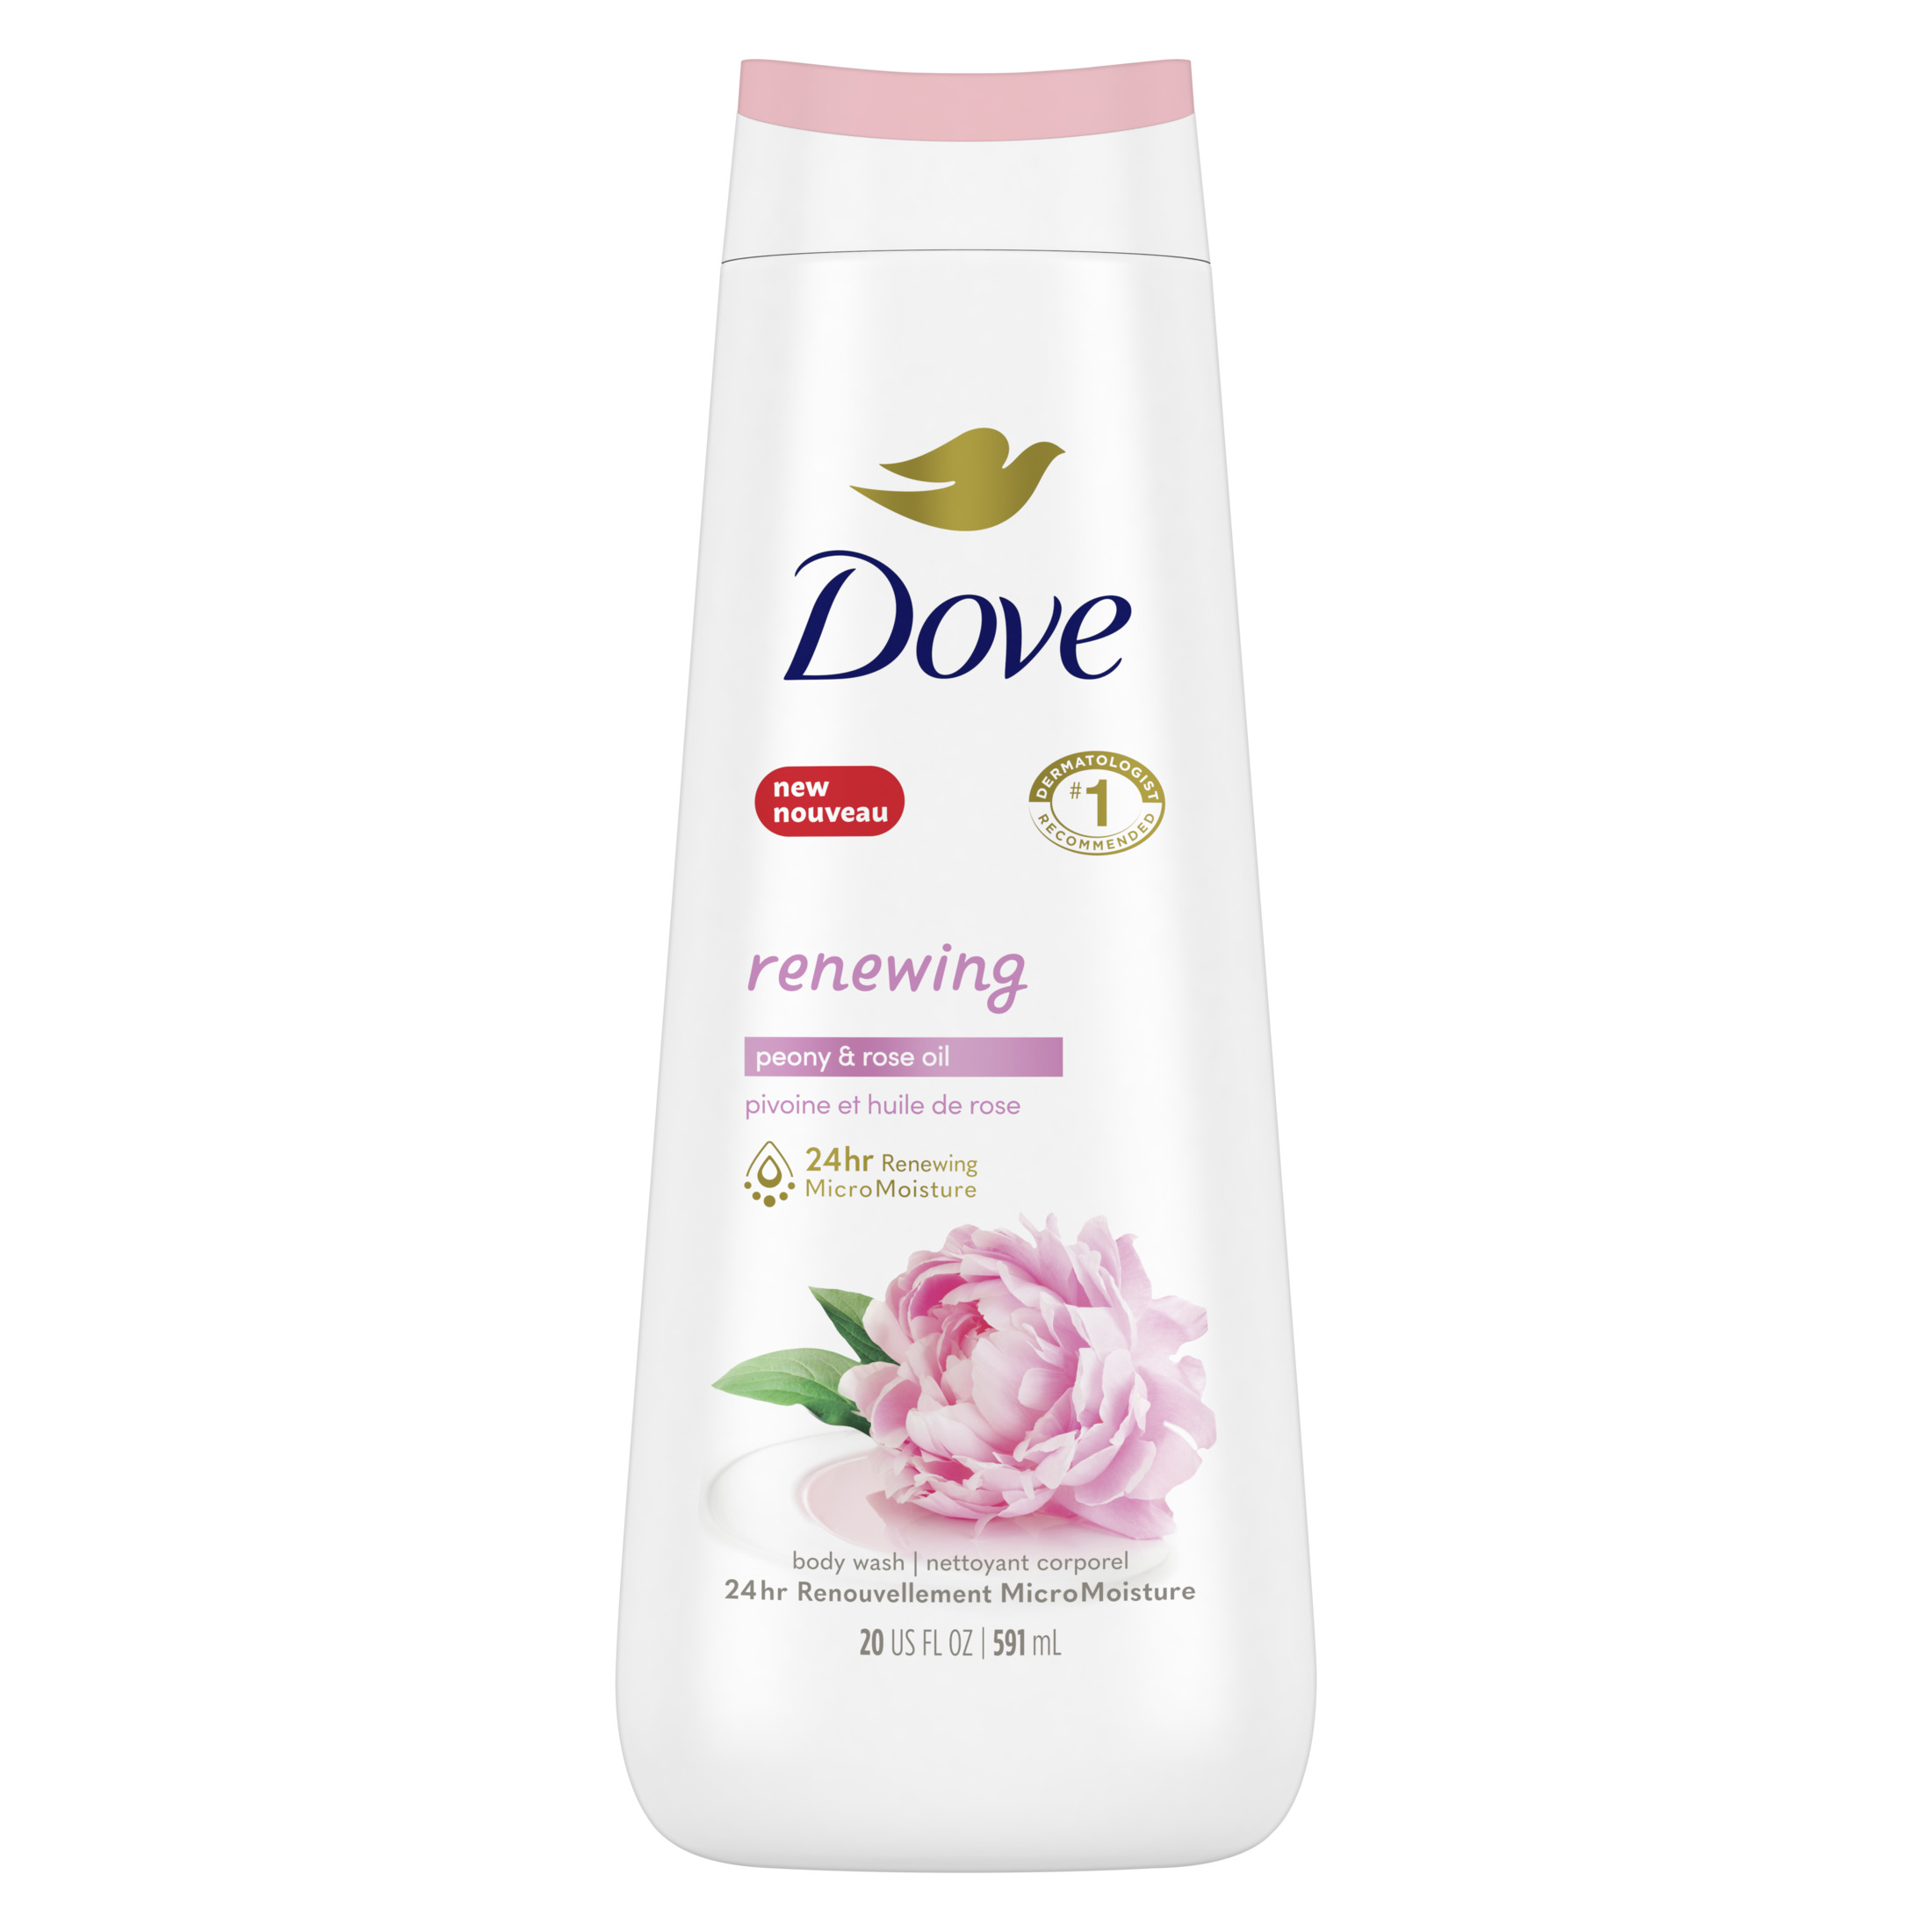 Dove Renewing Gentle Women's Body Wash for All Skin Type, Peony and Rose Oil, 20 fl oz - image 1 of 11